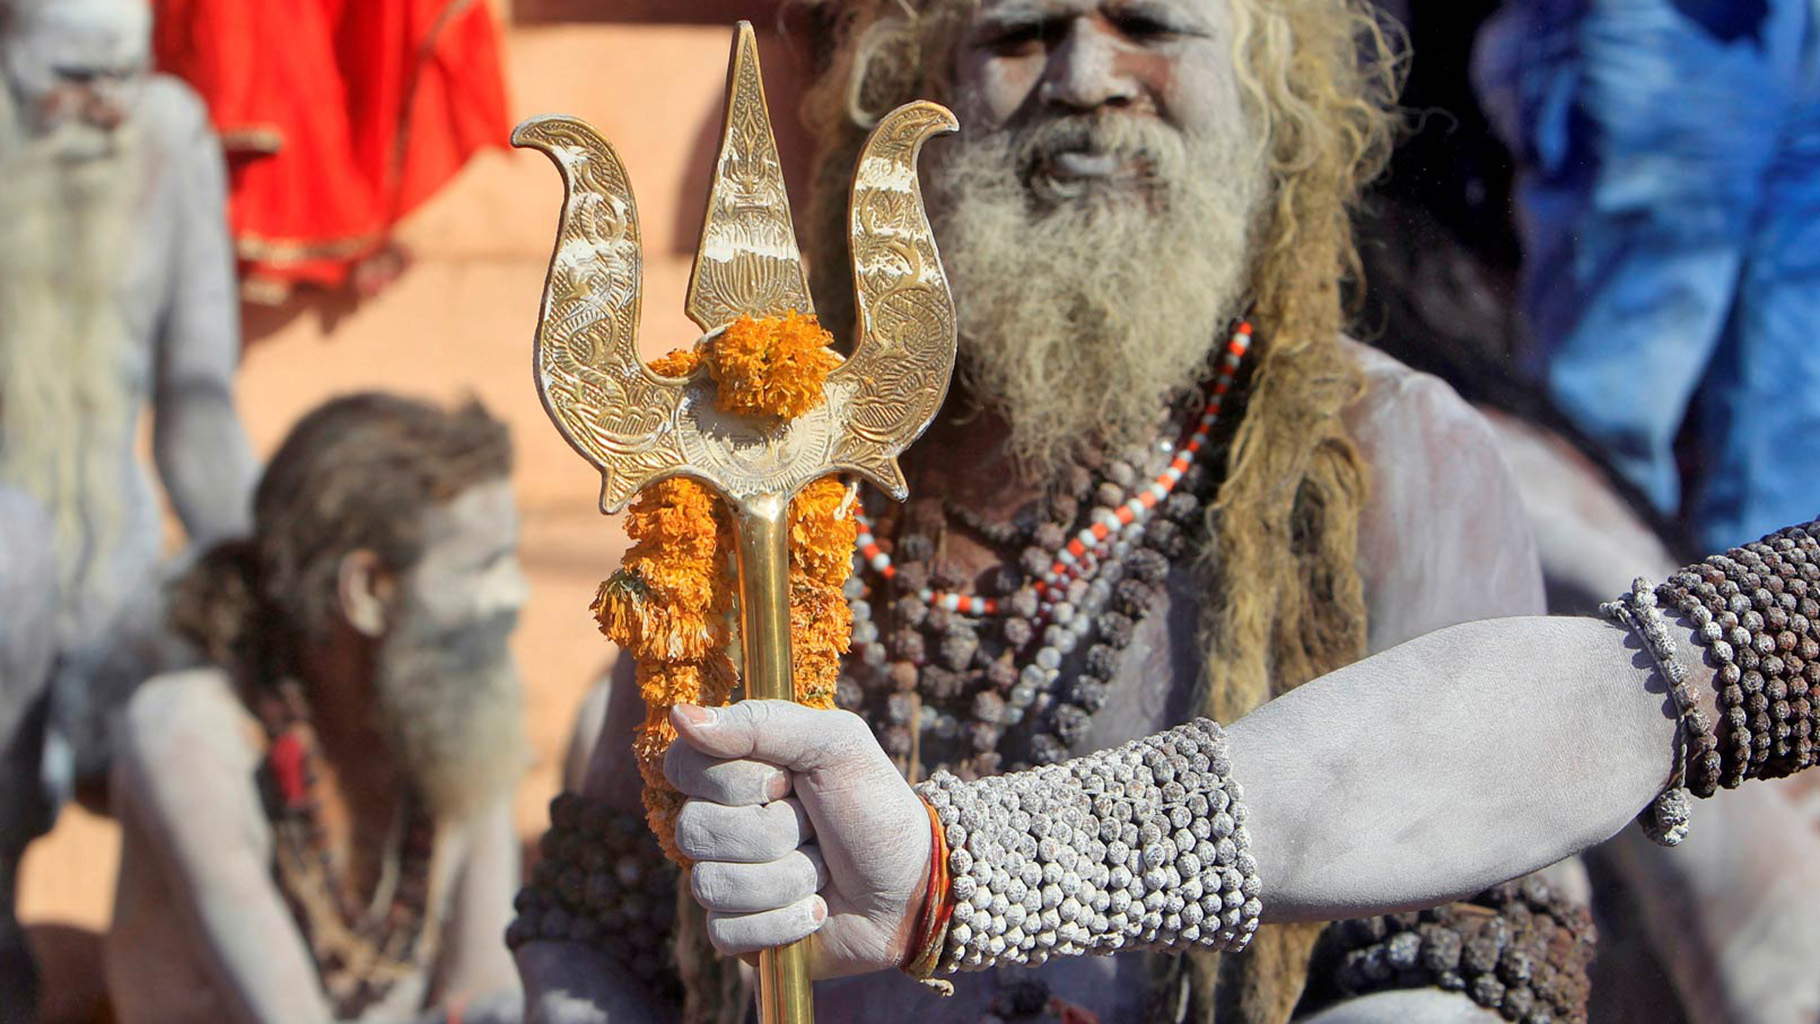 In Photos: Devotees Gather At Simhastha Kumbh Mela 2016 in Ujjain – The Quint